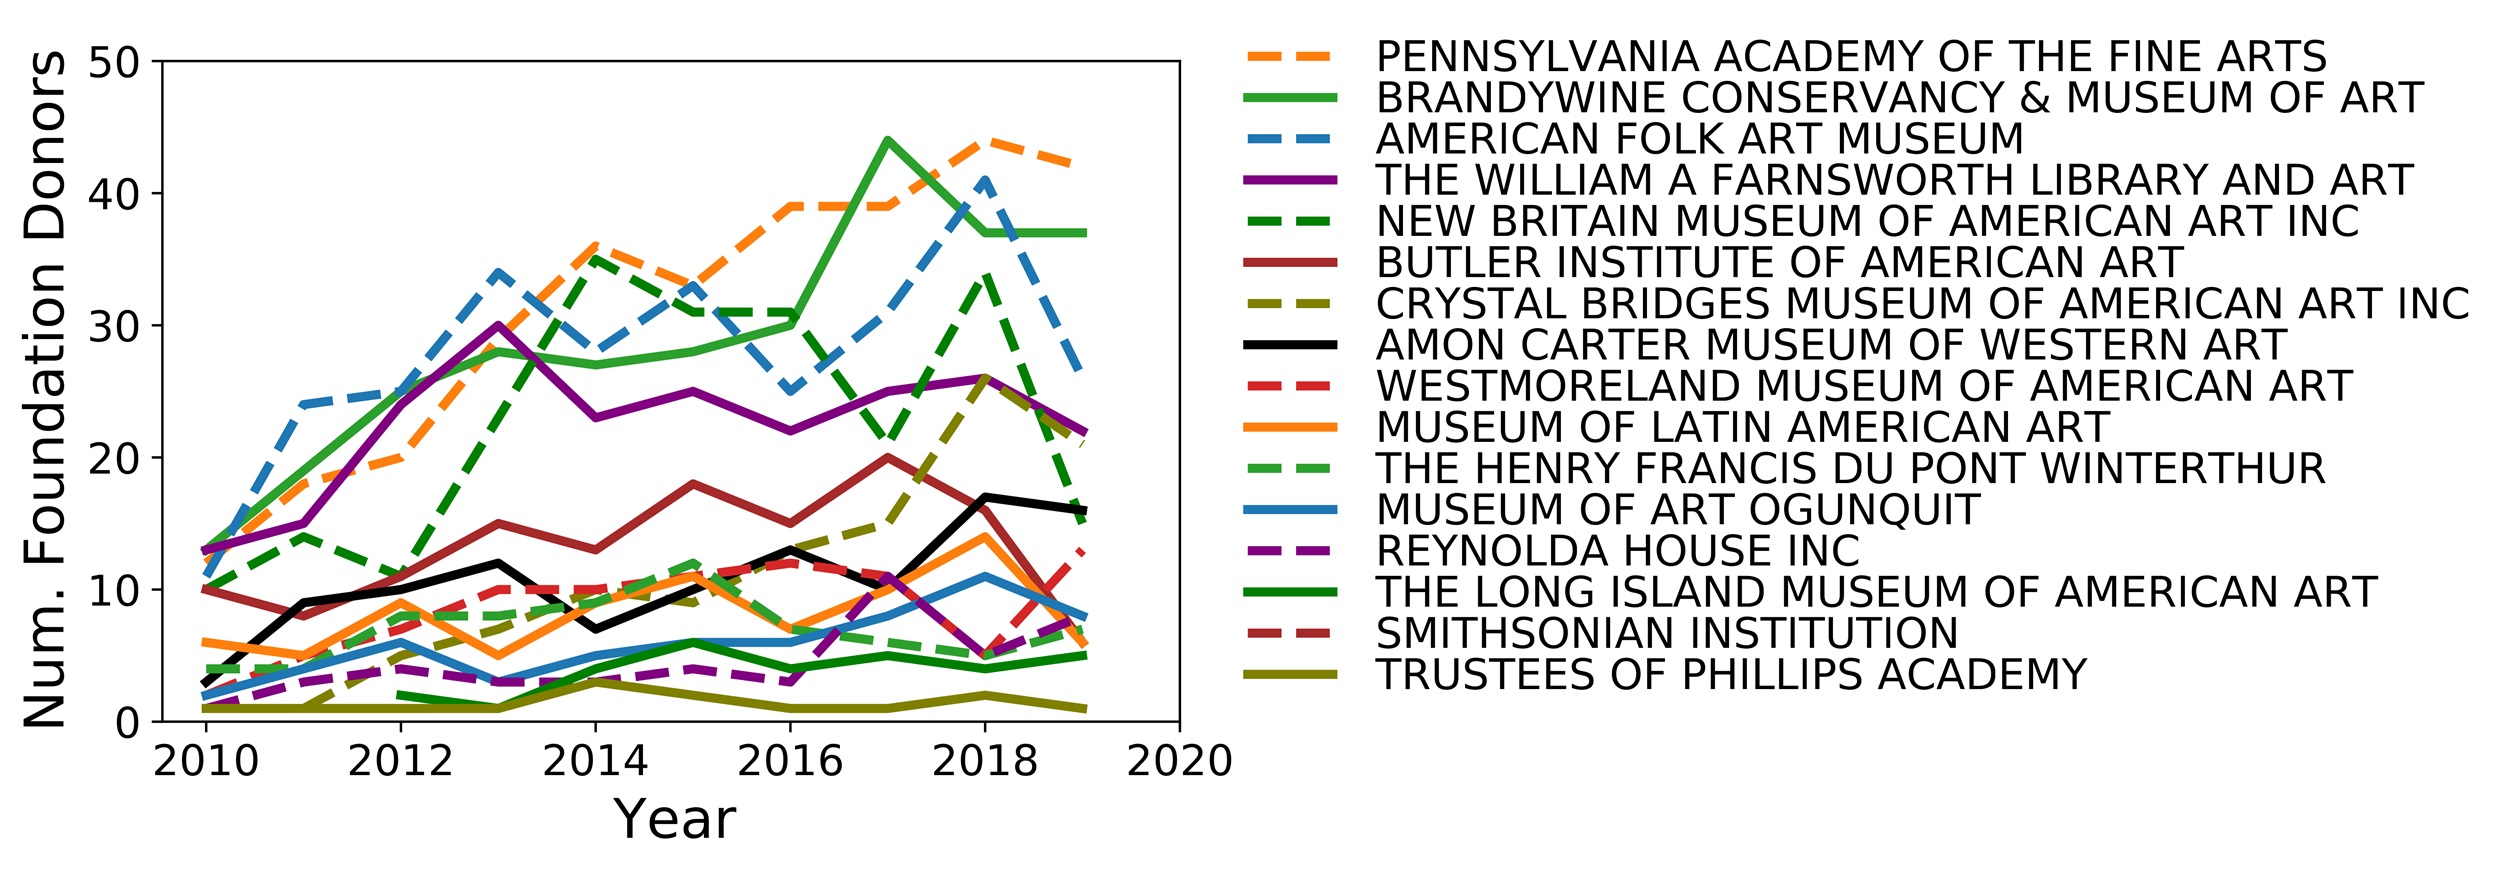 The same line graph as in fig. 6, but with the Whitney Museum of American Art selected out to show more detail in the remaining institutions. Here the Pennsylvania Academy of the Fine Arts shows the greatest number (and growth) of foundation donors, but by a much less wide margin than the Whitney.